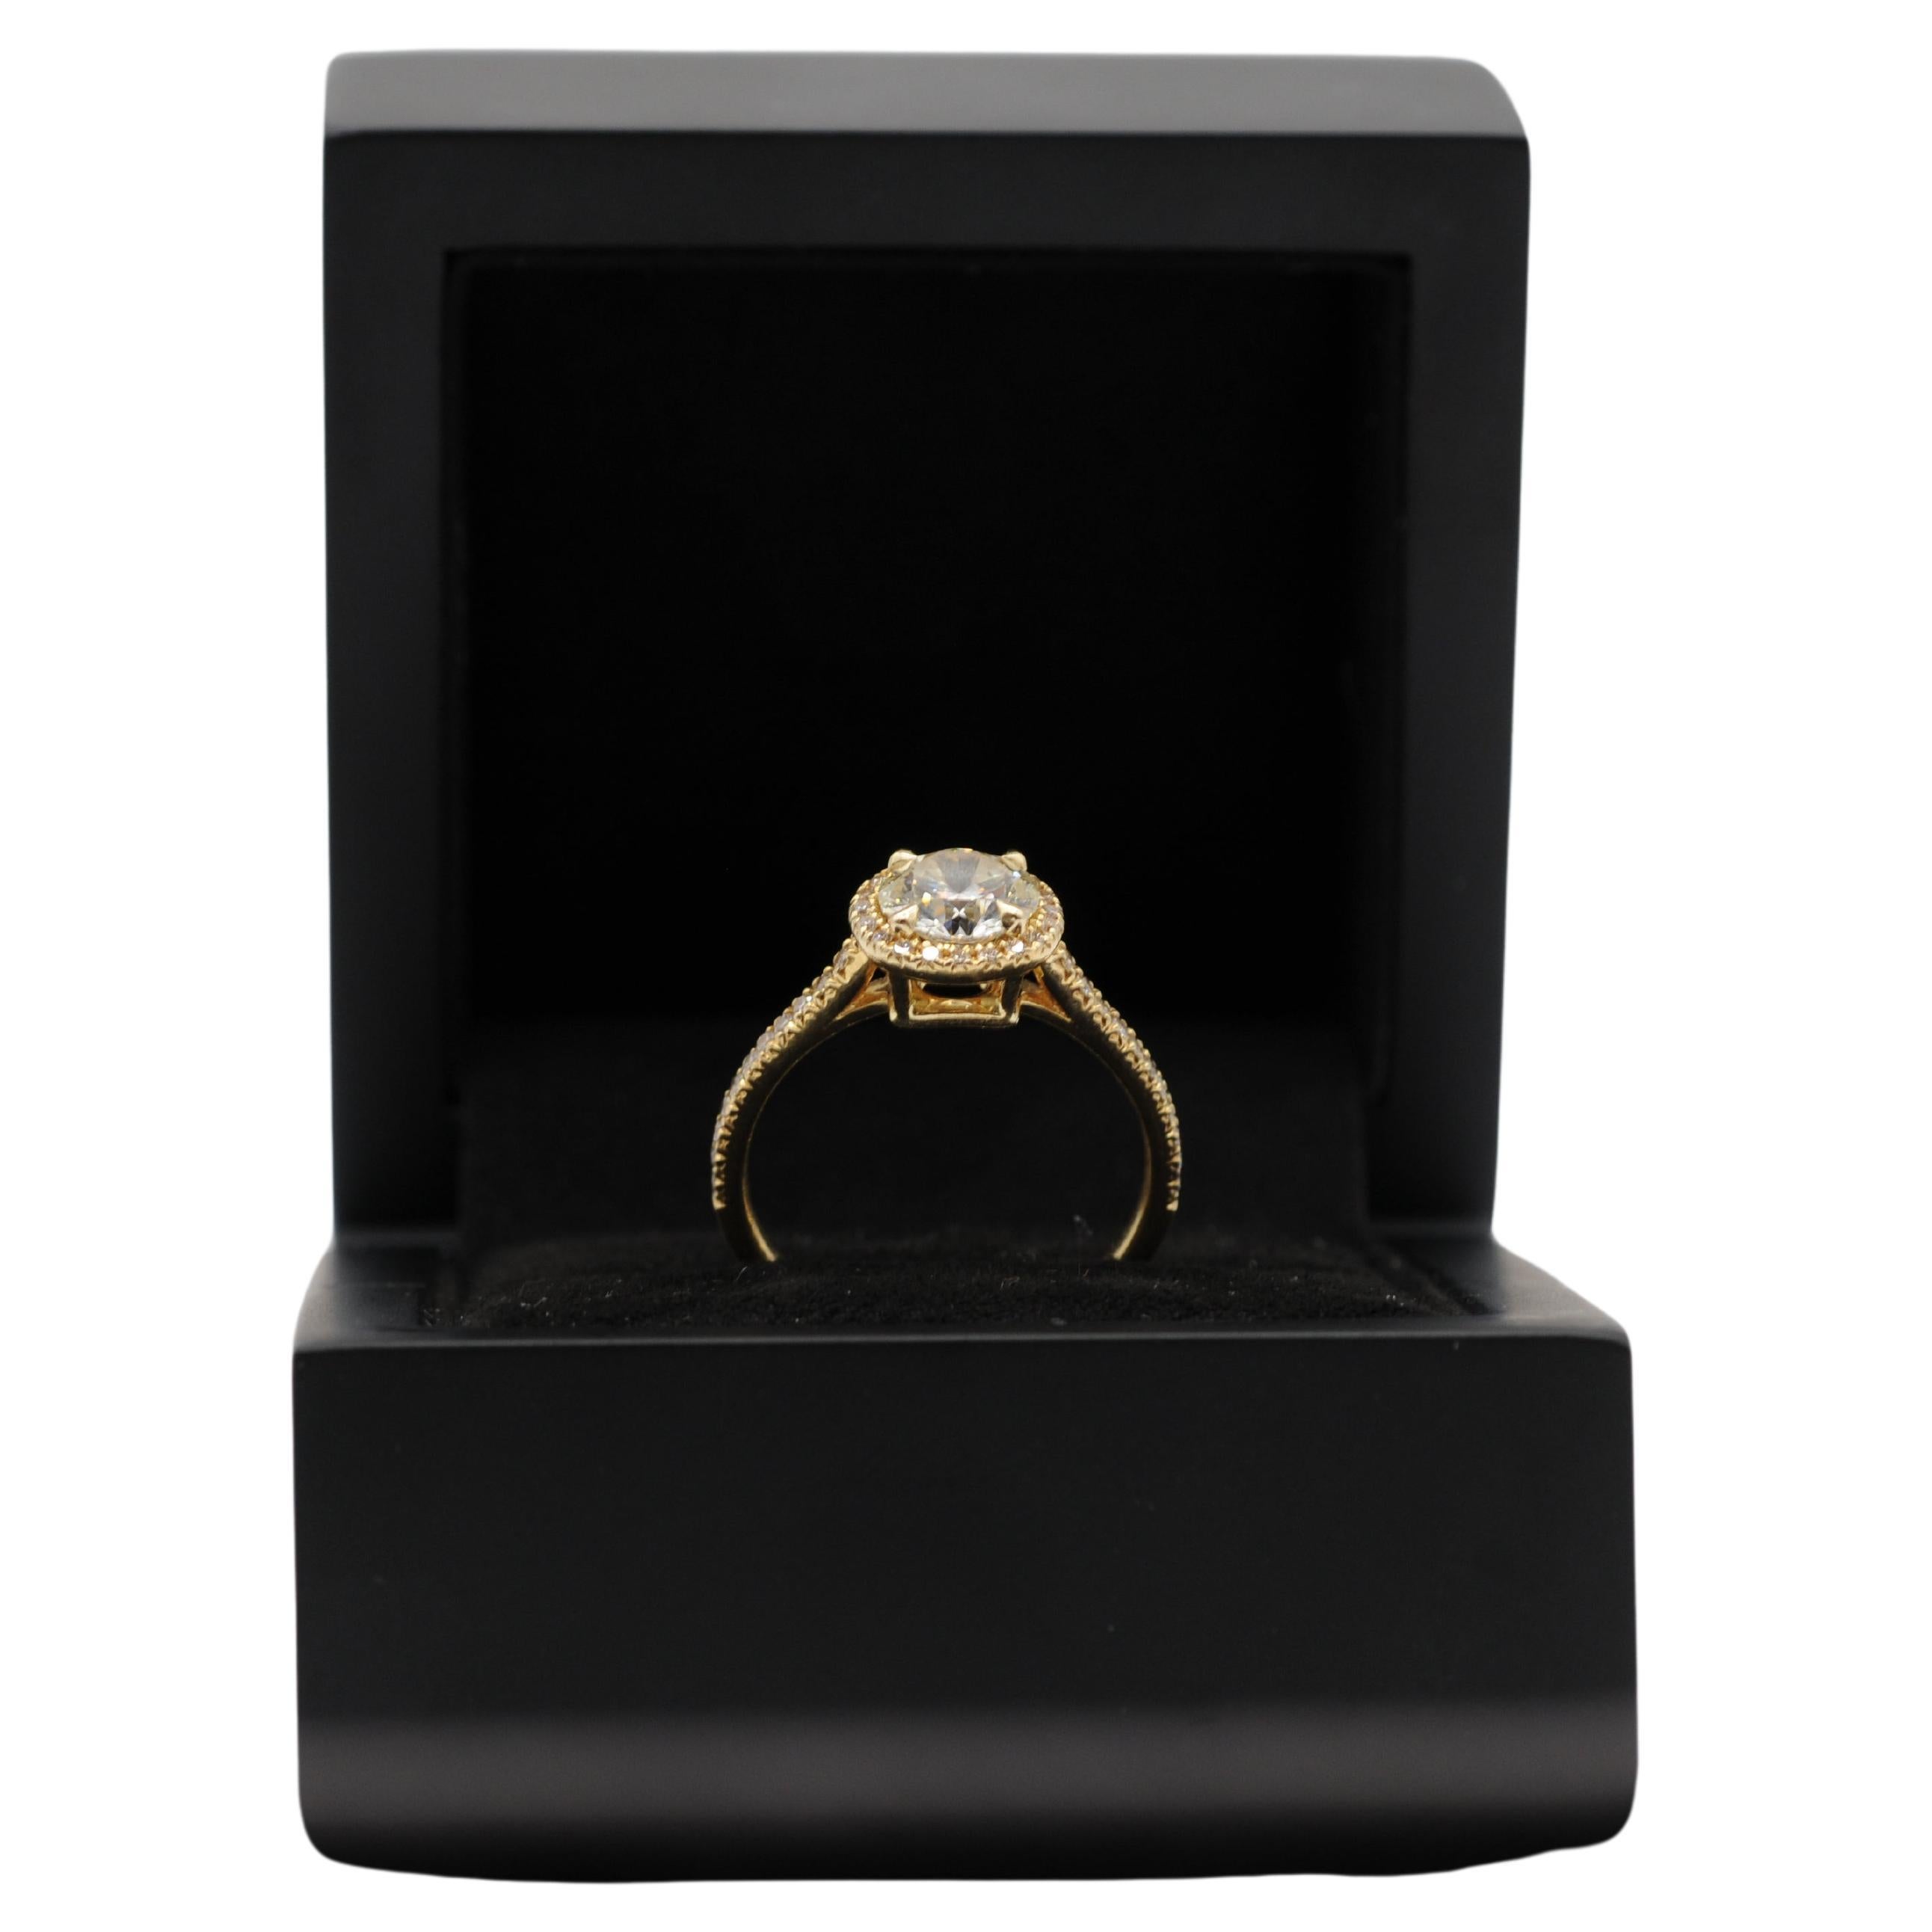 Majestic solitare Ring with diamond ca: 1.4ct in 18k gold 